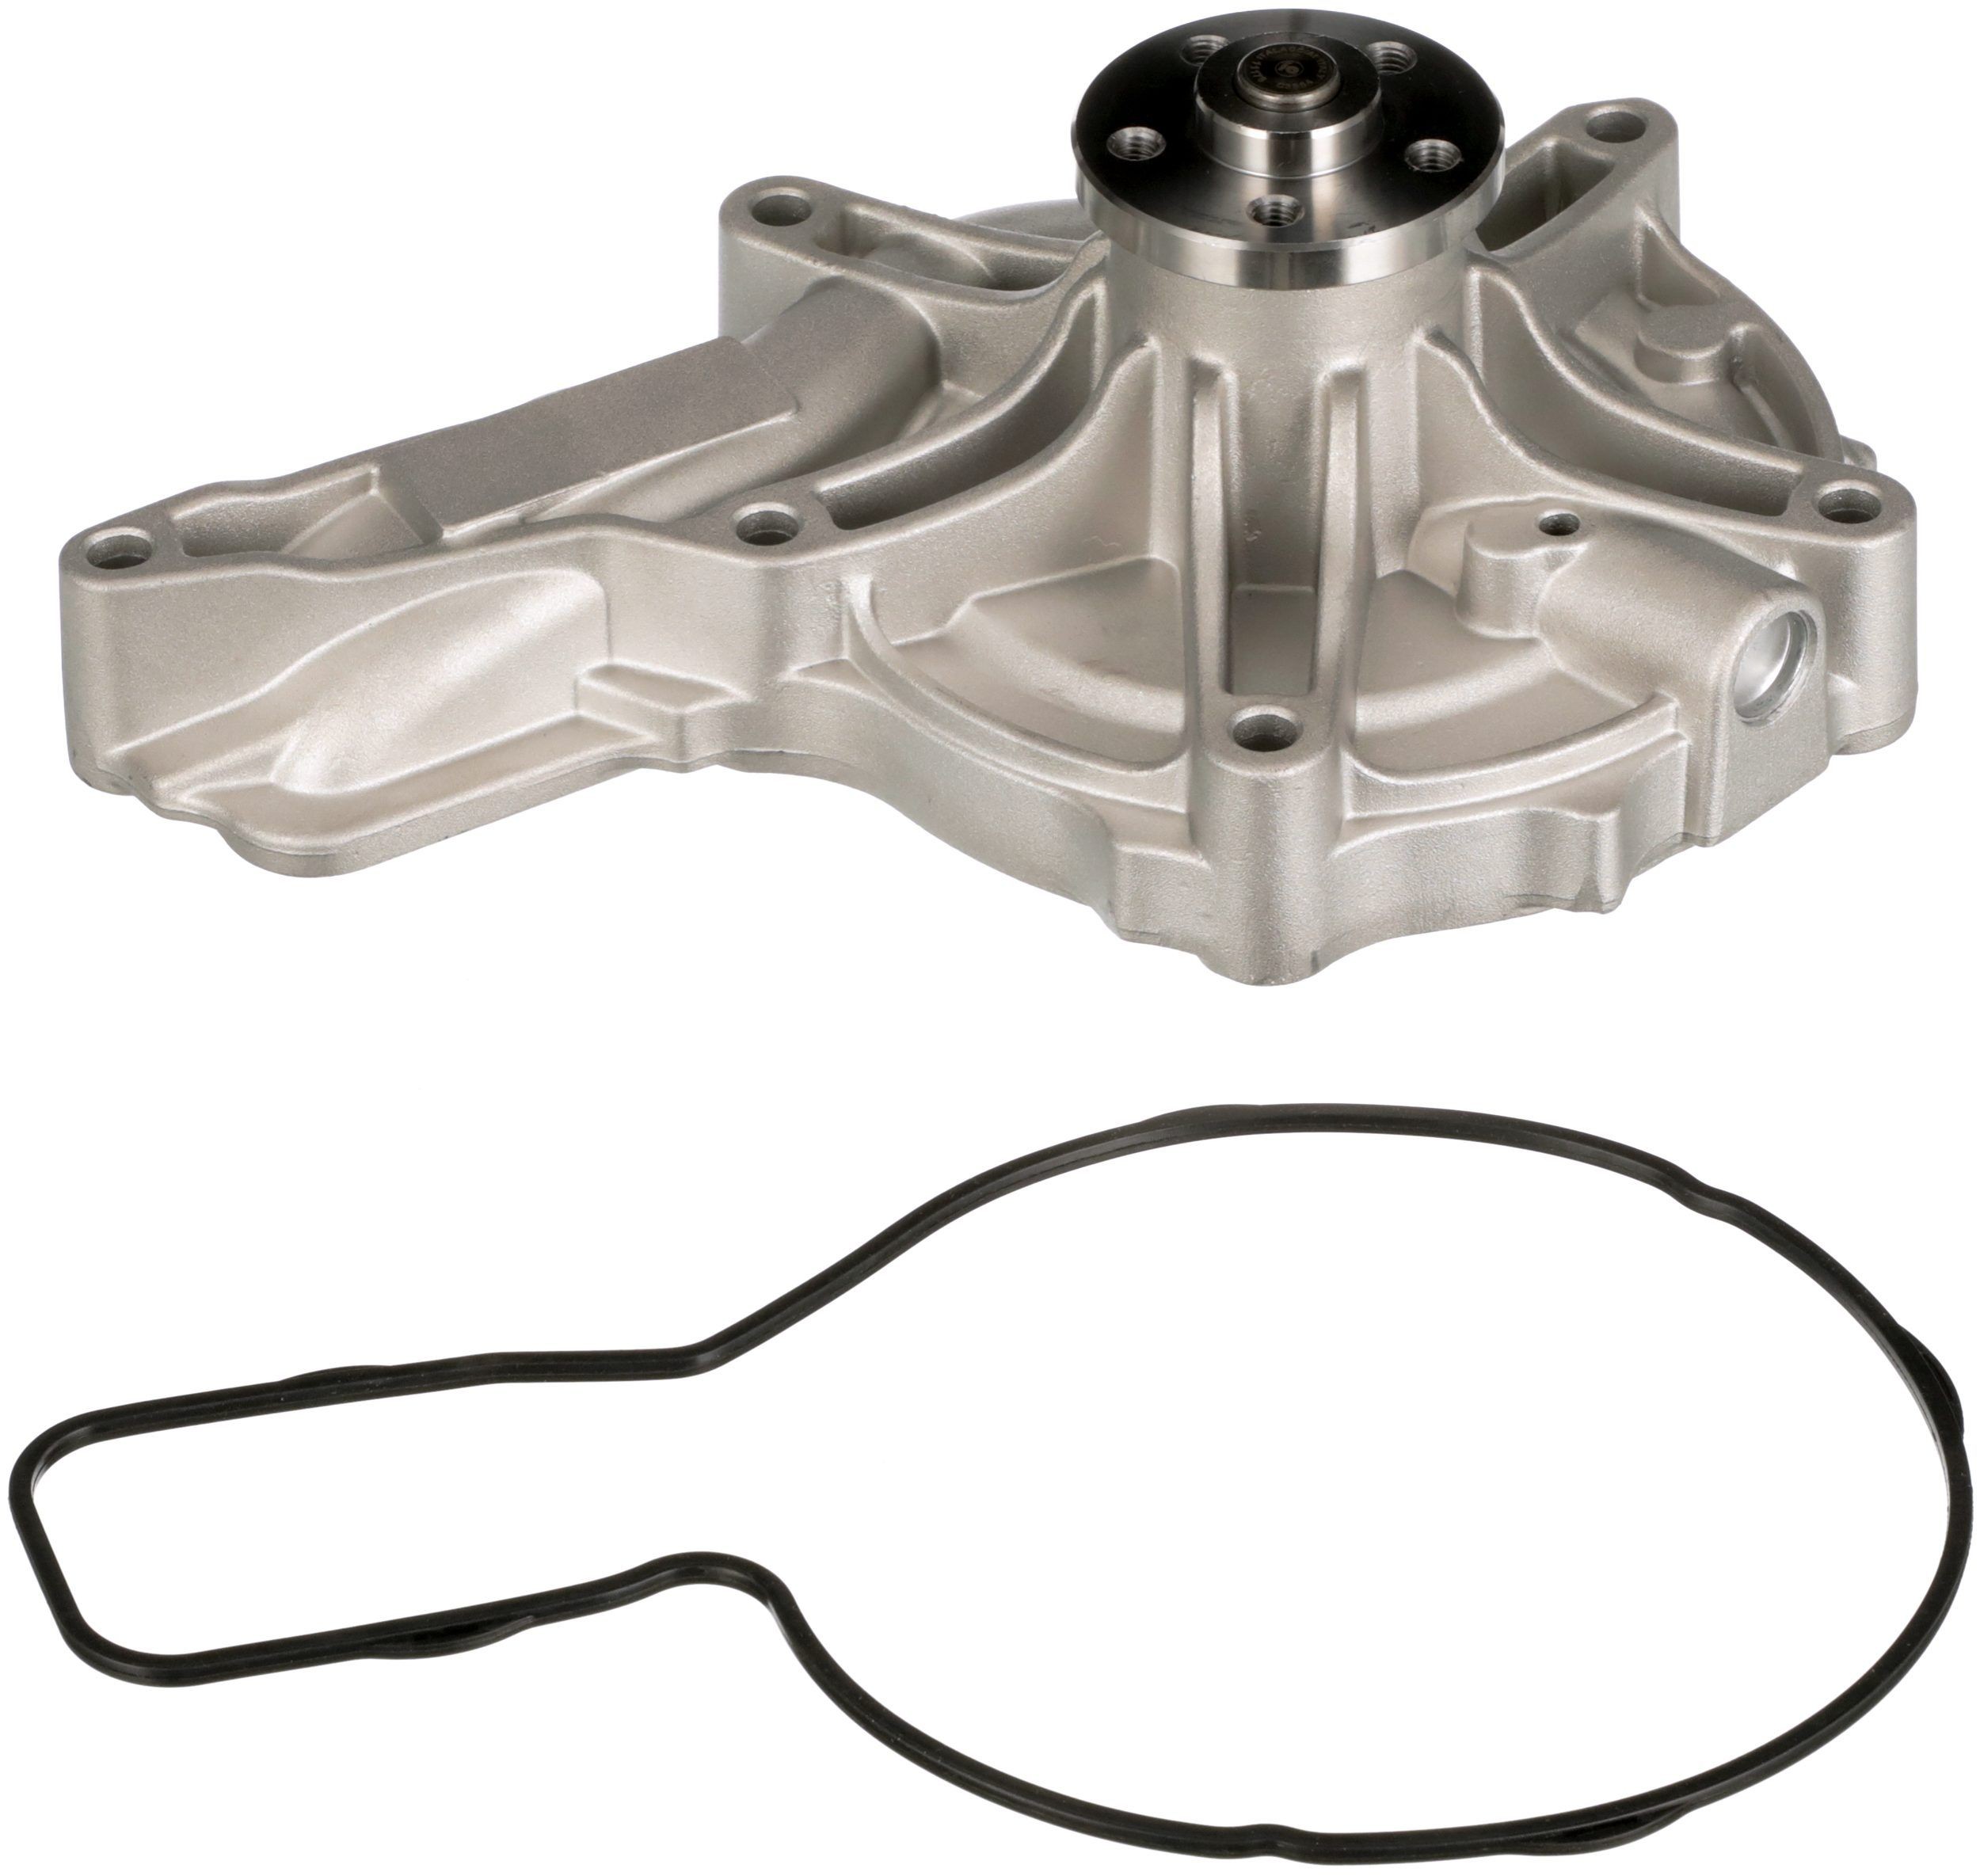 GATES 7702-15004 Water pump Metal, without belt pulley, for v-ribbed belt pulley, with gaskets/seals